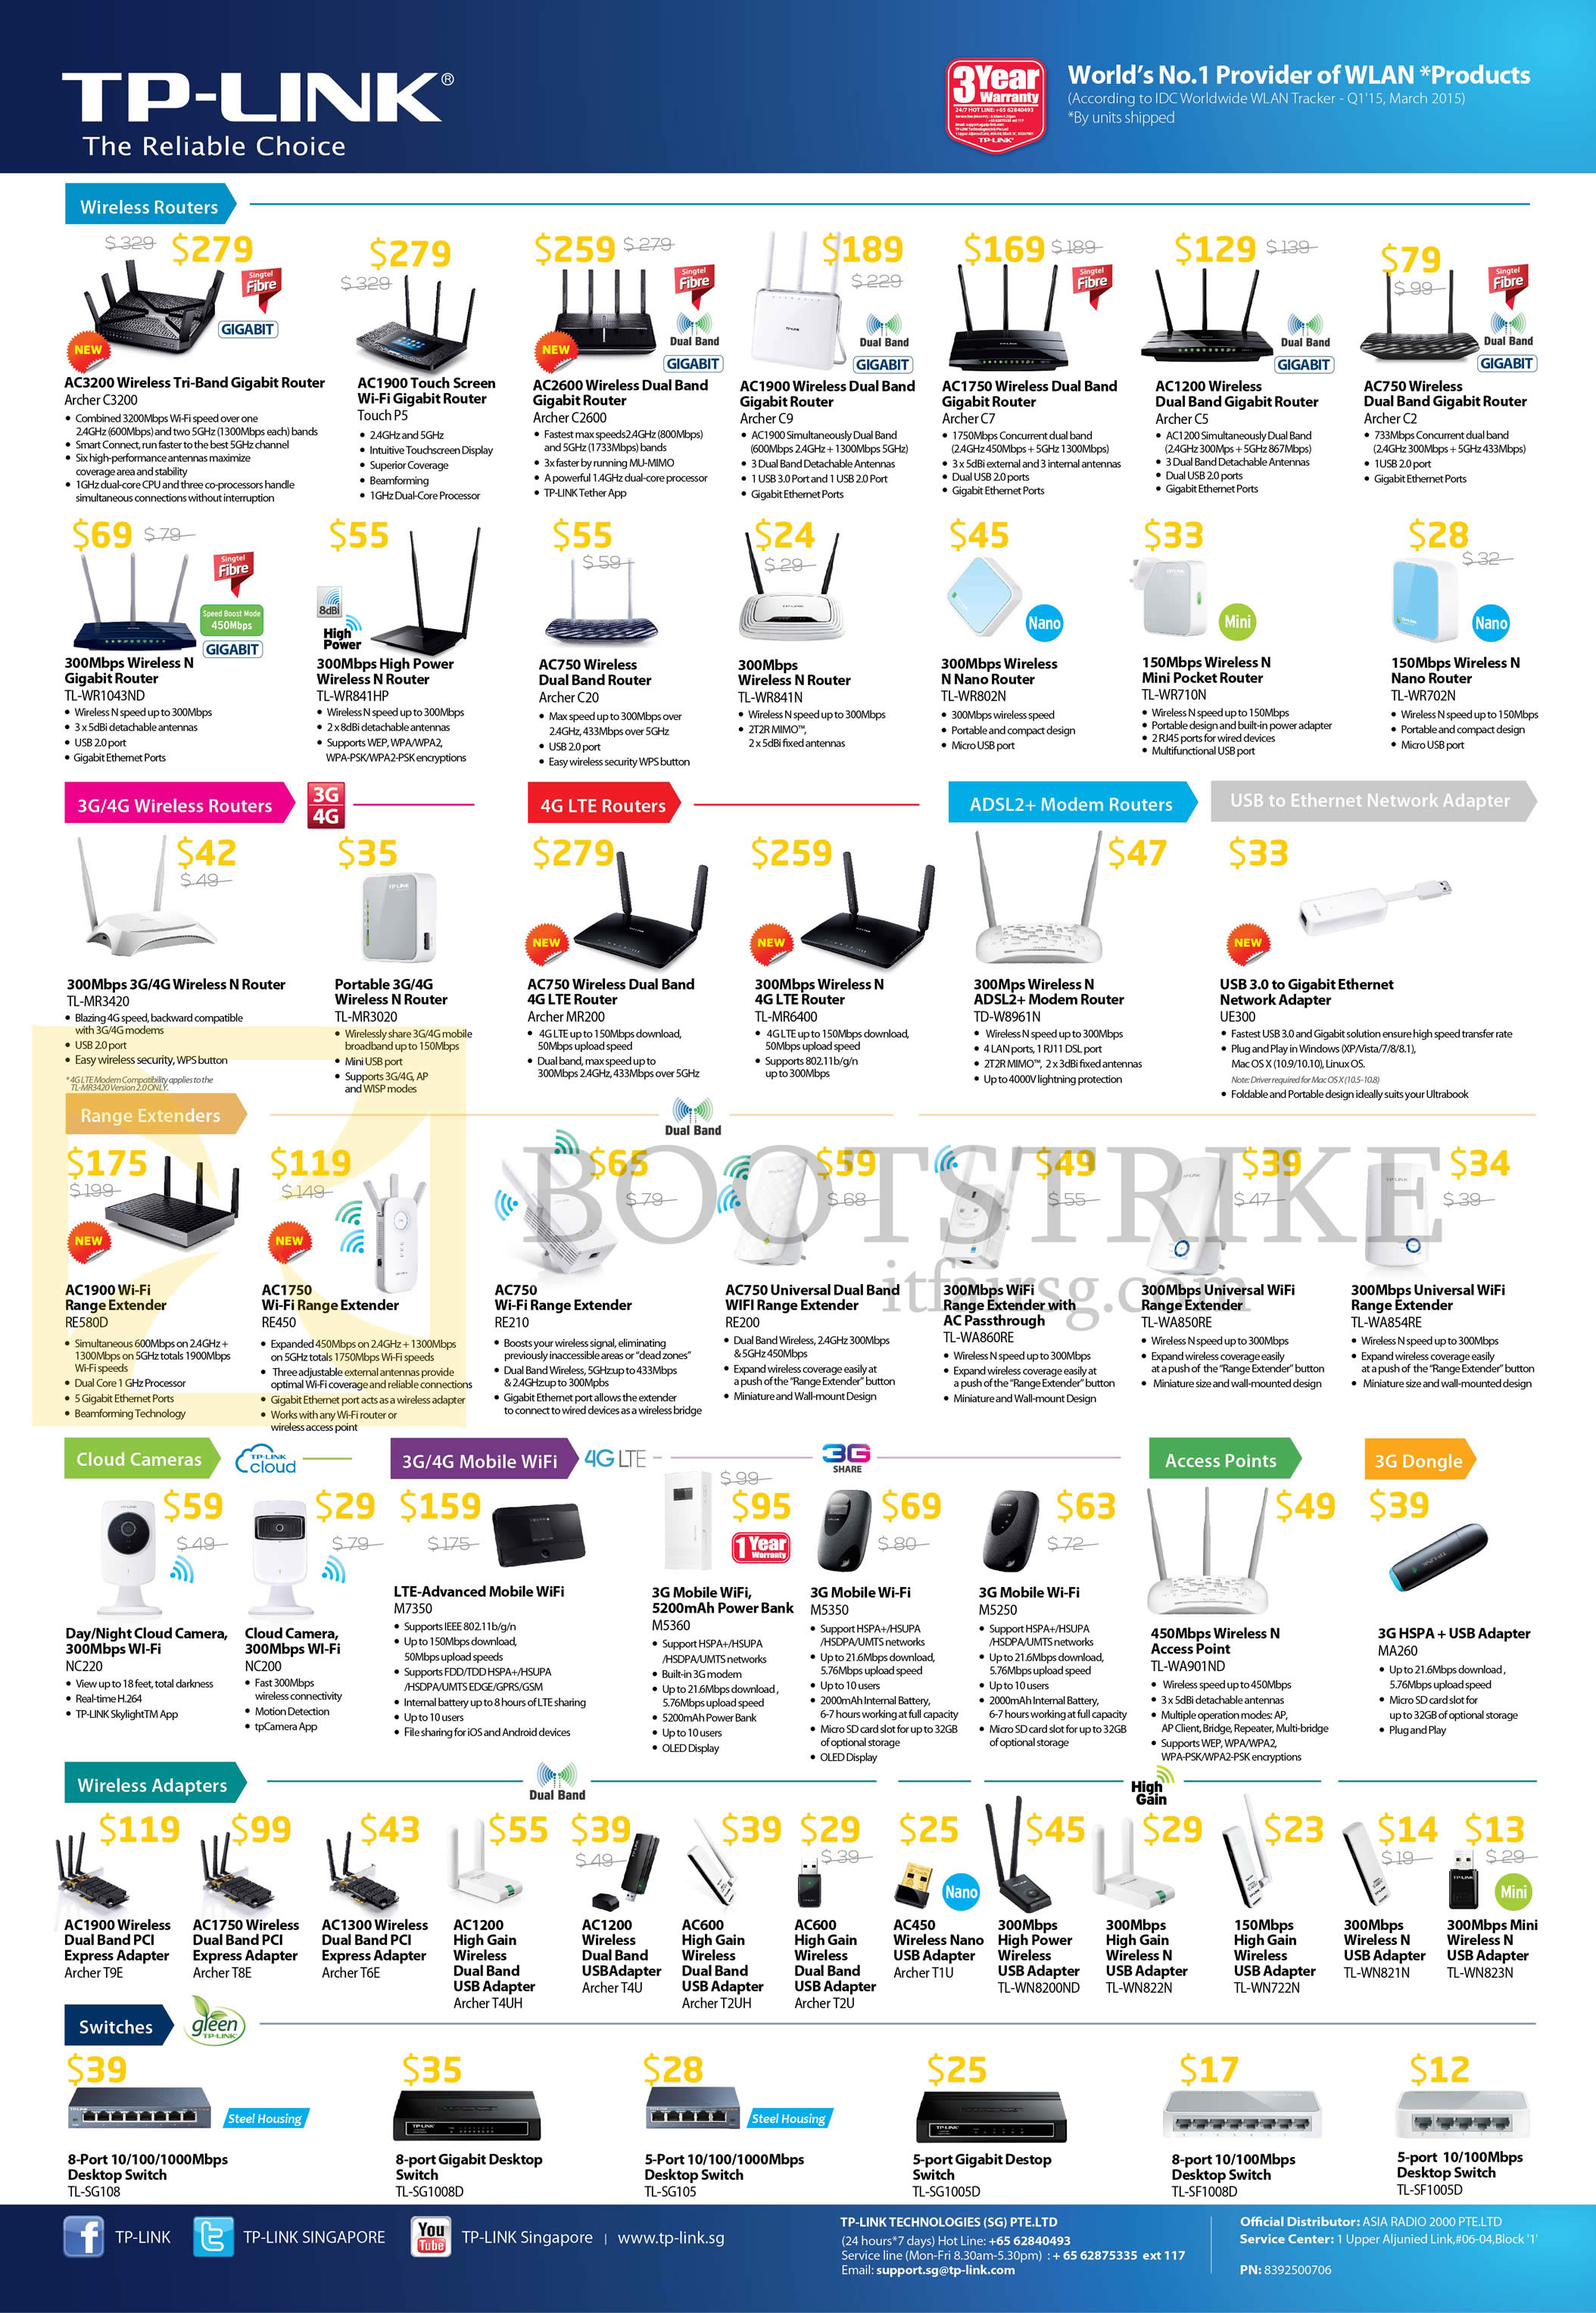 SITEX 2015 price list image brochure of Asia Radio TP-Link Networking Wireless Routers, Modem Routers, Network Adapter, Range Extenders, Cloud Cameras, Mobile Wifi, Access Points, Dongle, Wireless Adapters, Switches